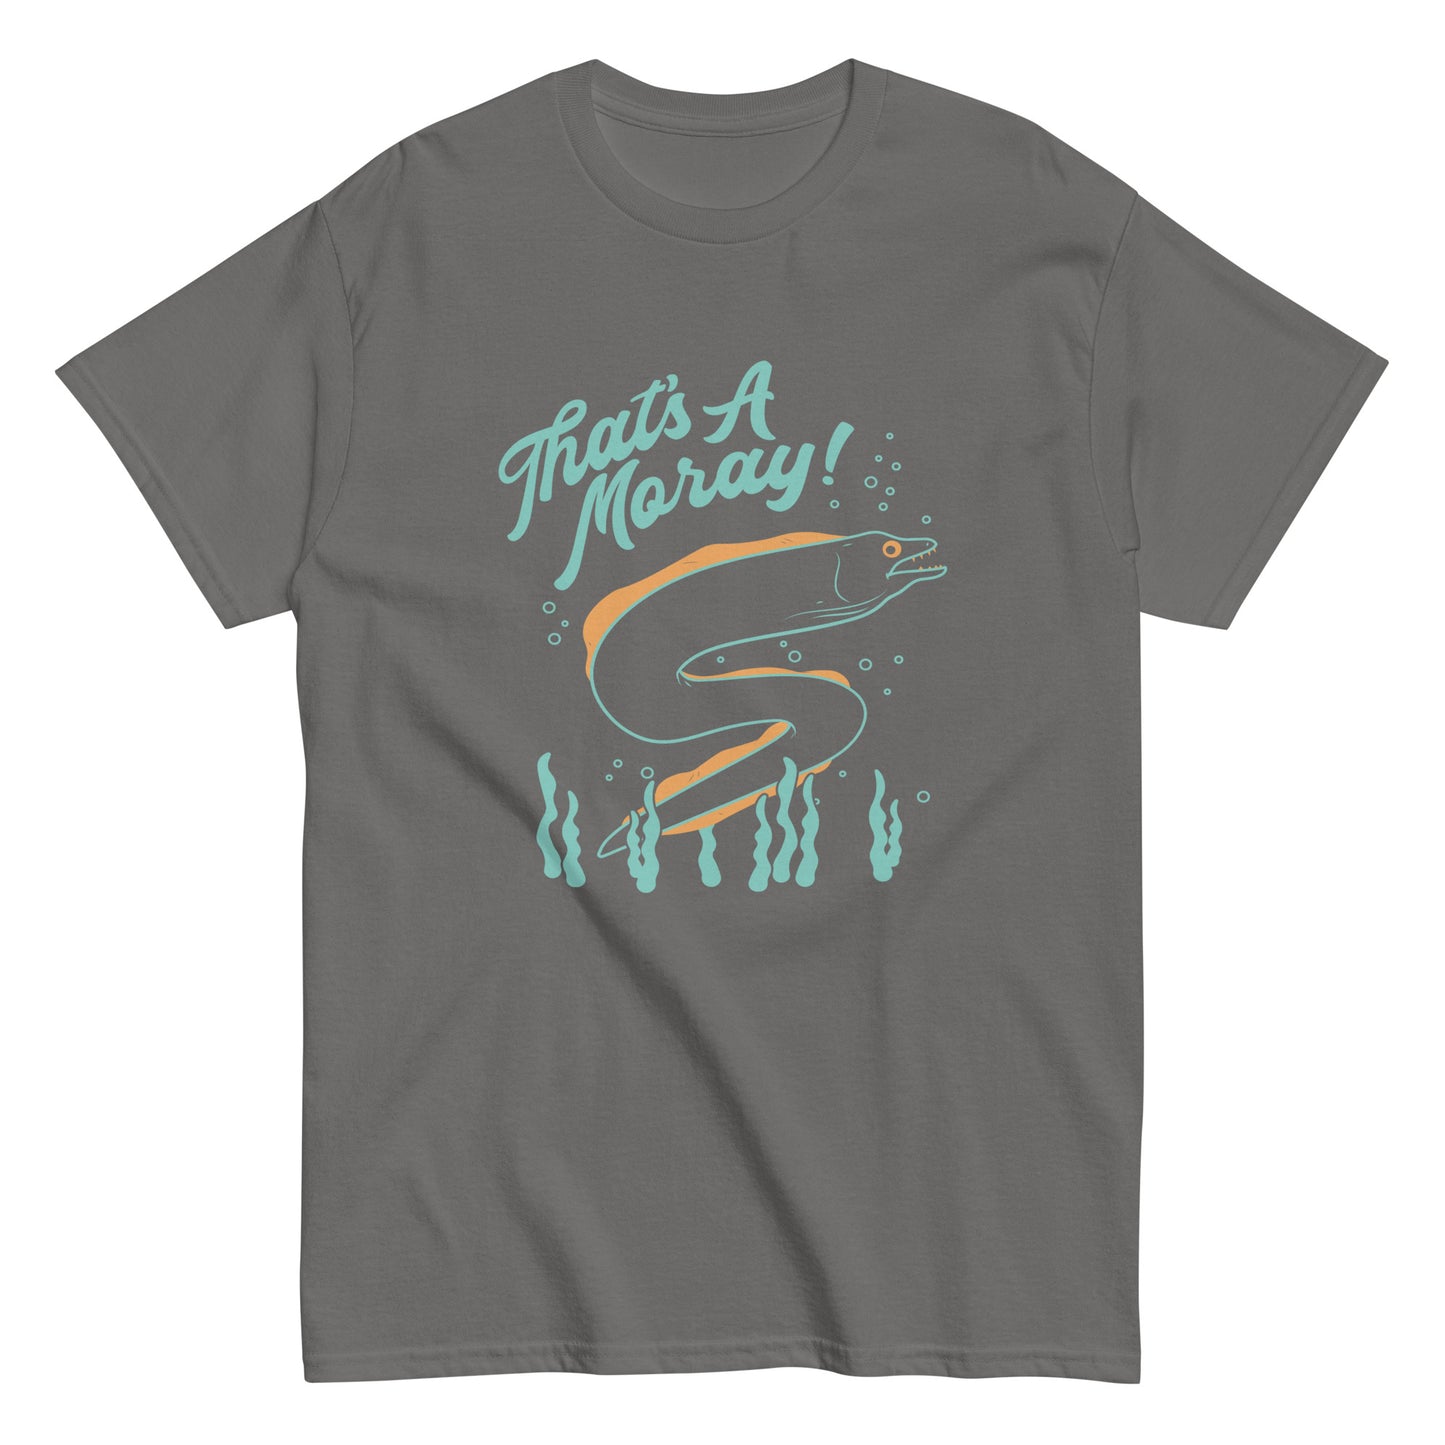 That's A Moray! Men's Classic Tee